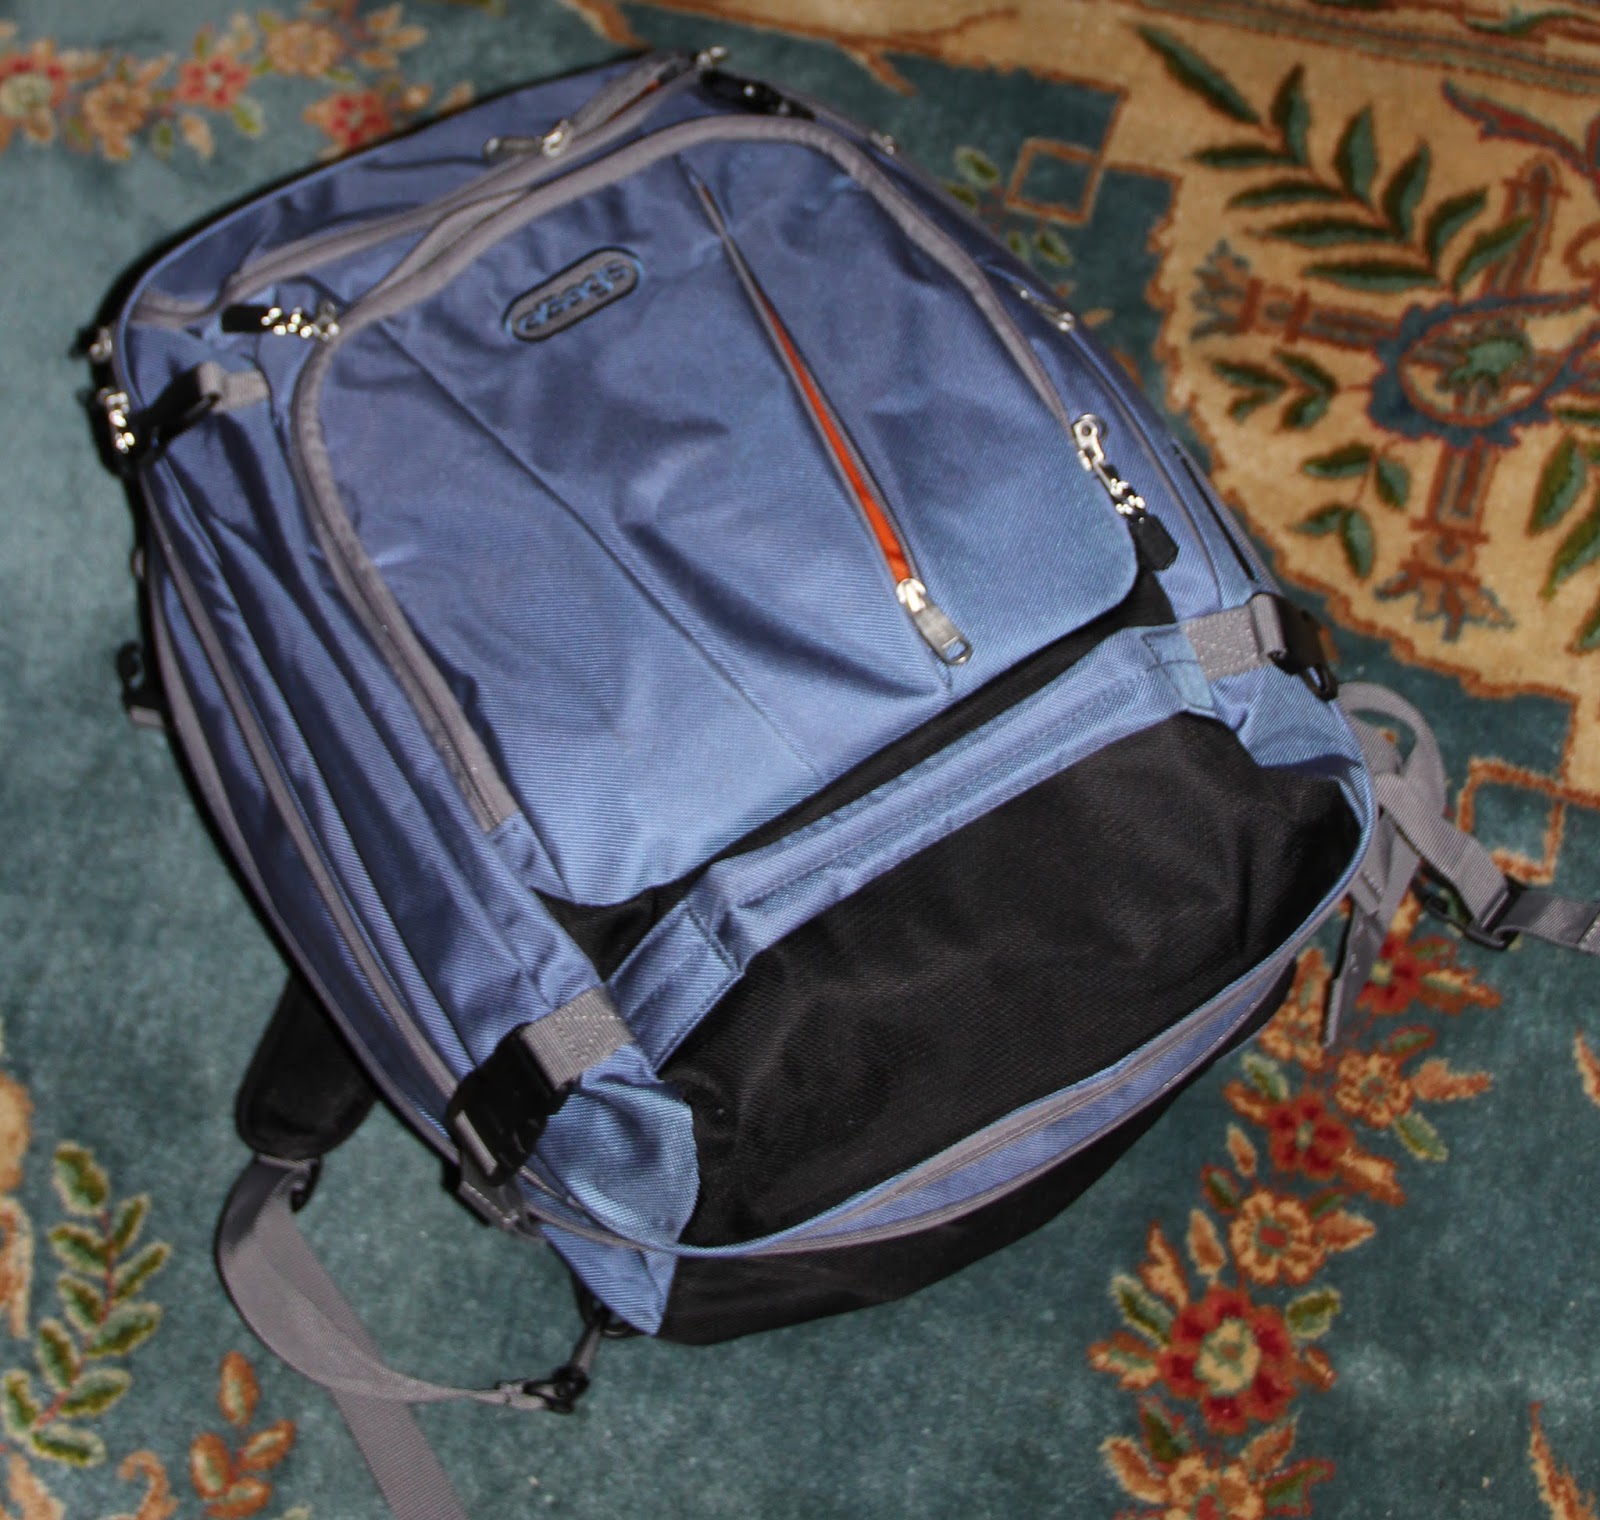 eBags Mother Lode Weekender Convertible --- Review